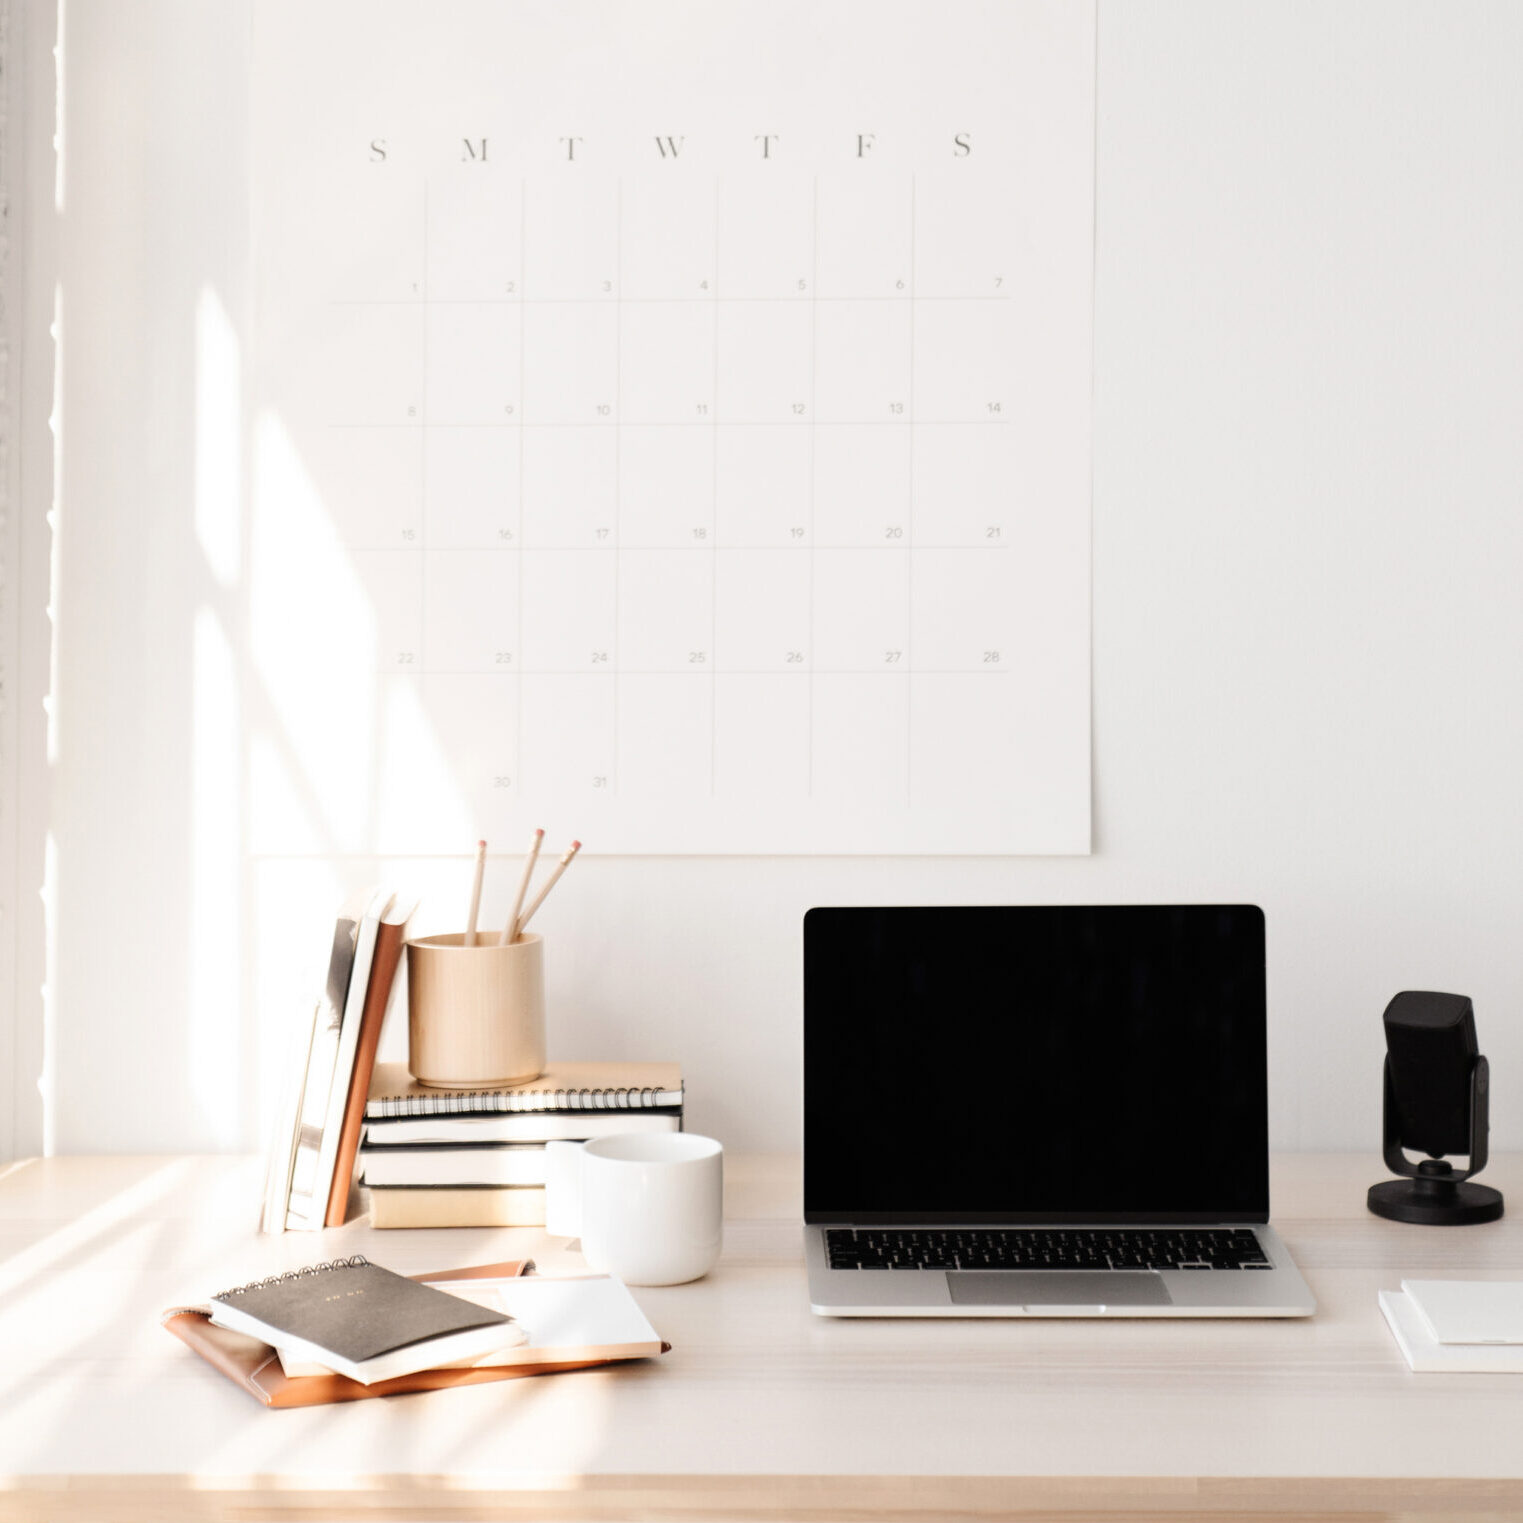 Styled stock photo of well organized desk with laptop, notebooks and monthly planner on the wall.